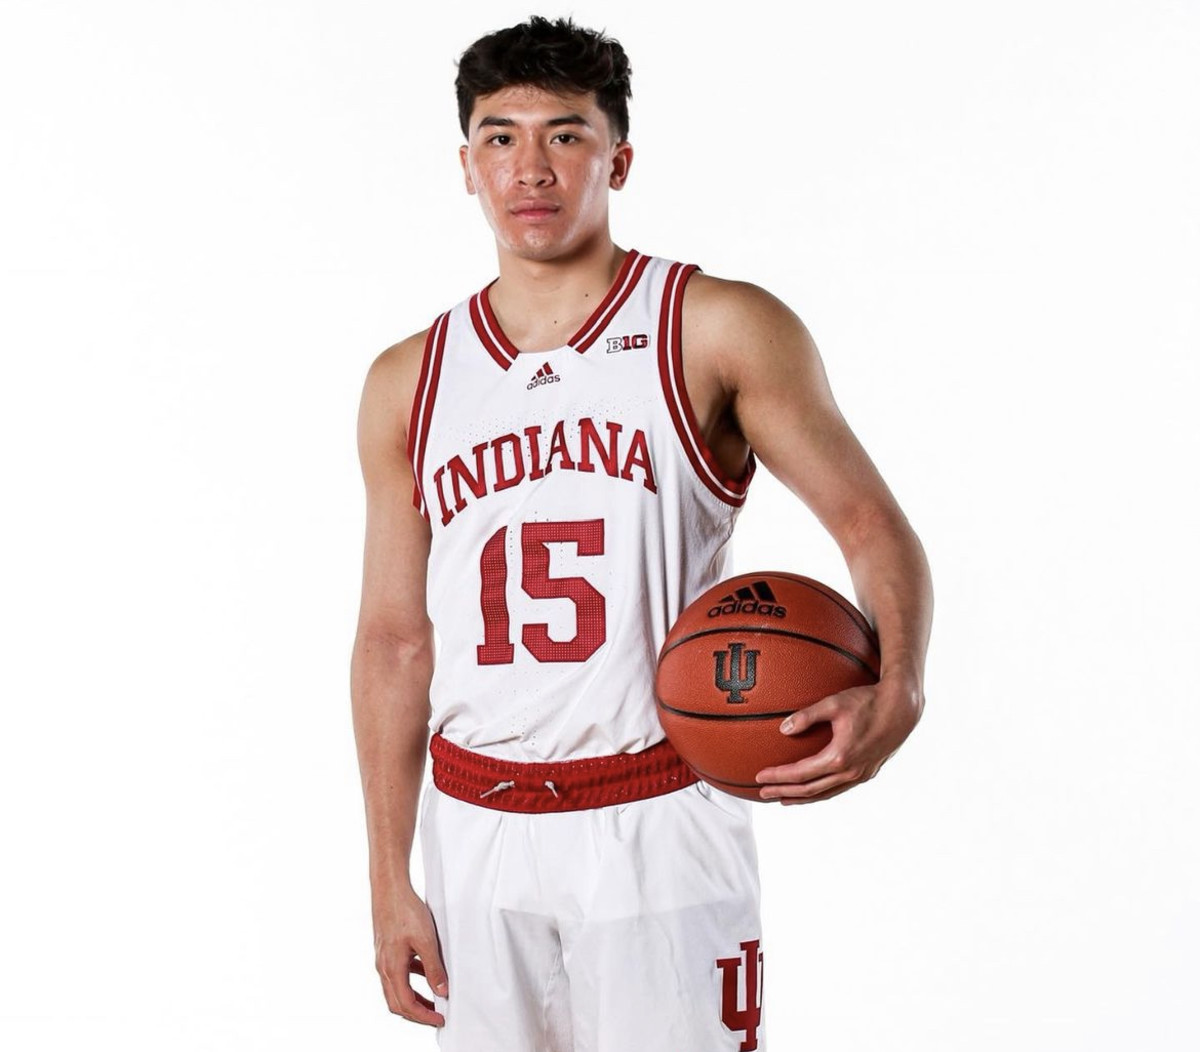 Indiana freshman James Goodis pictured in No. 15 jersey.